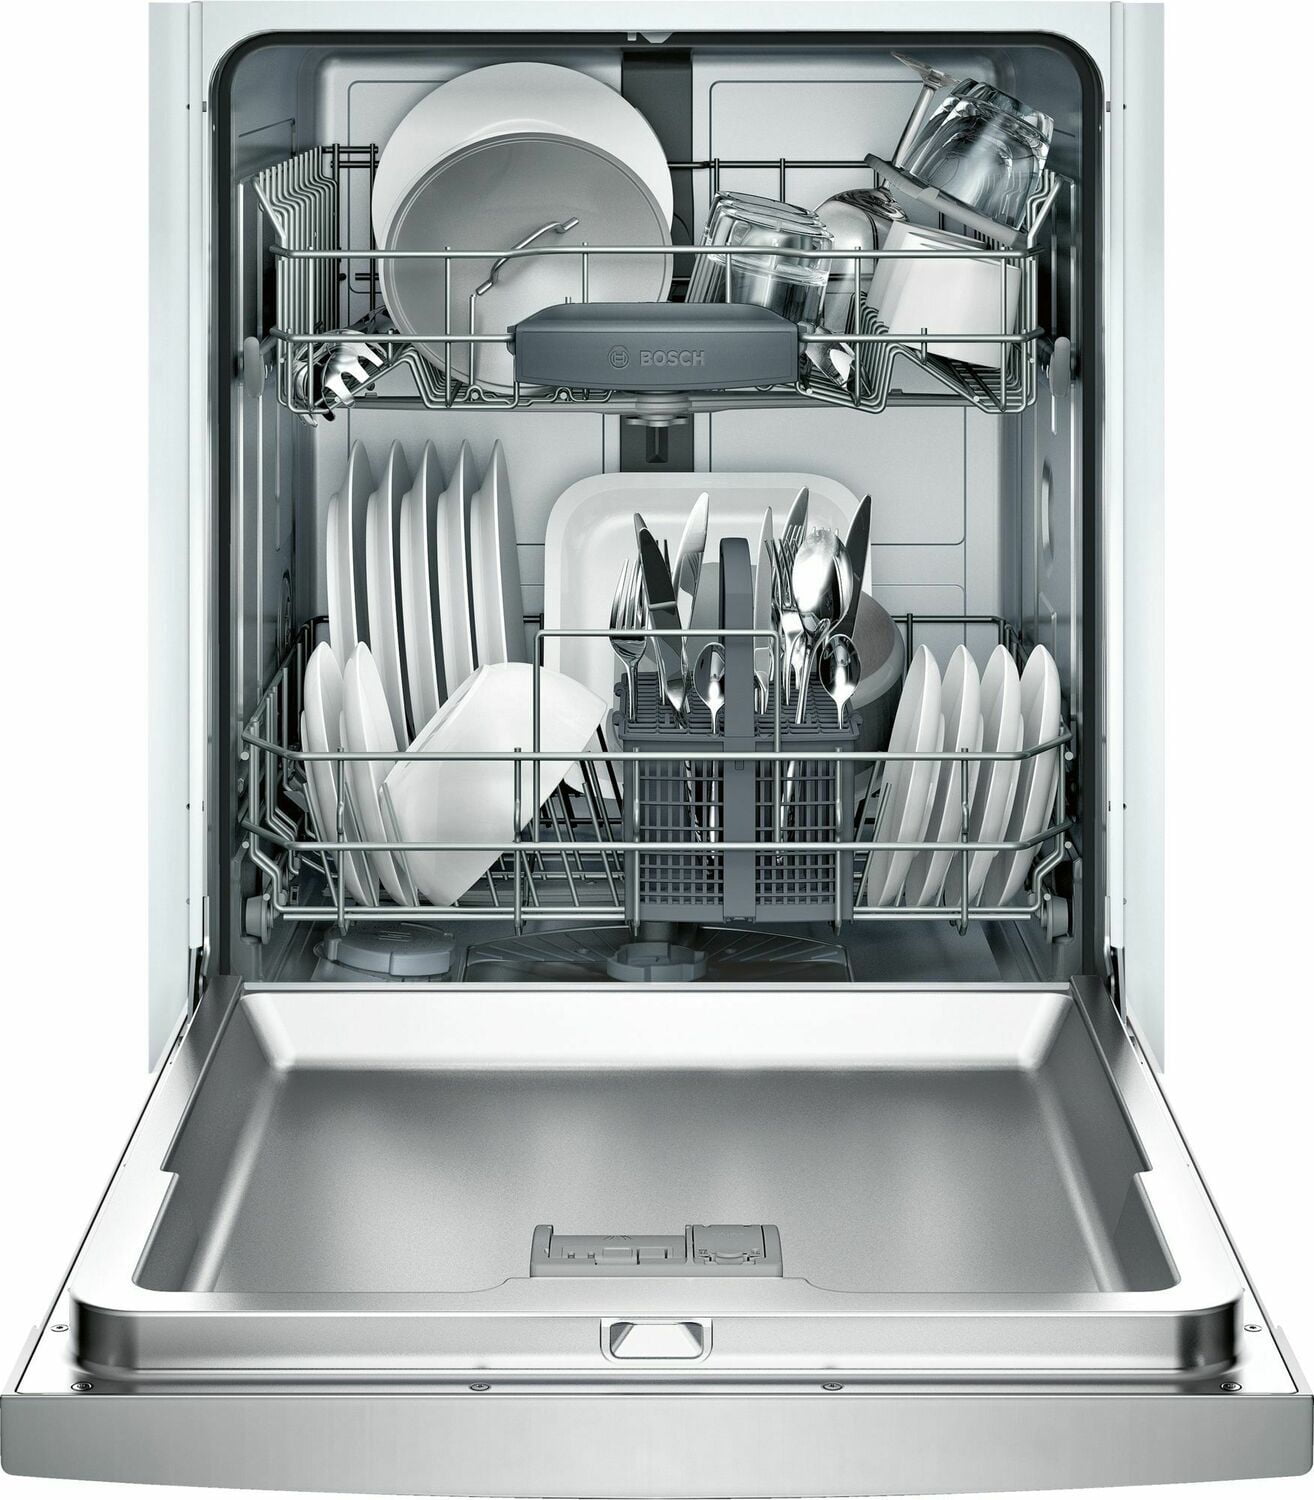 Bosch SGE53X55UC 300 Series Dishwasher 24'' Stainless Steel Sge53X55Uc